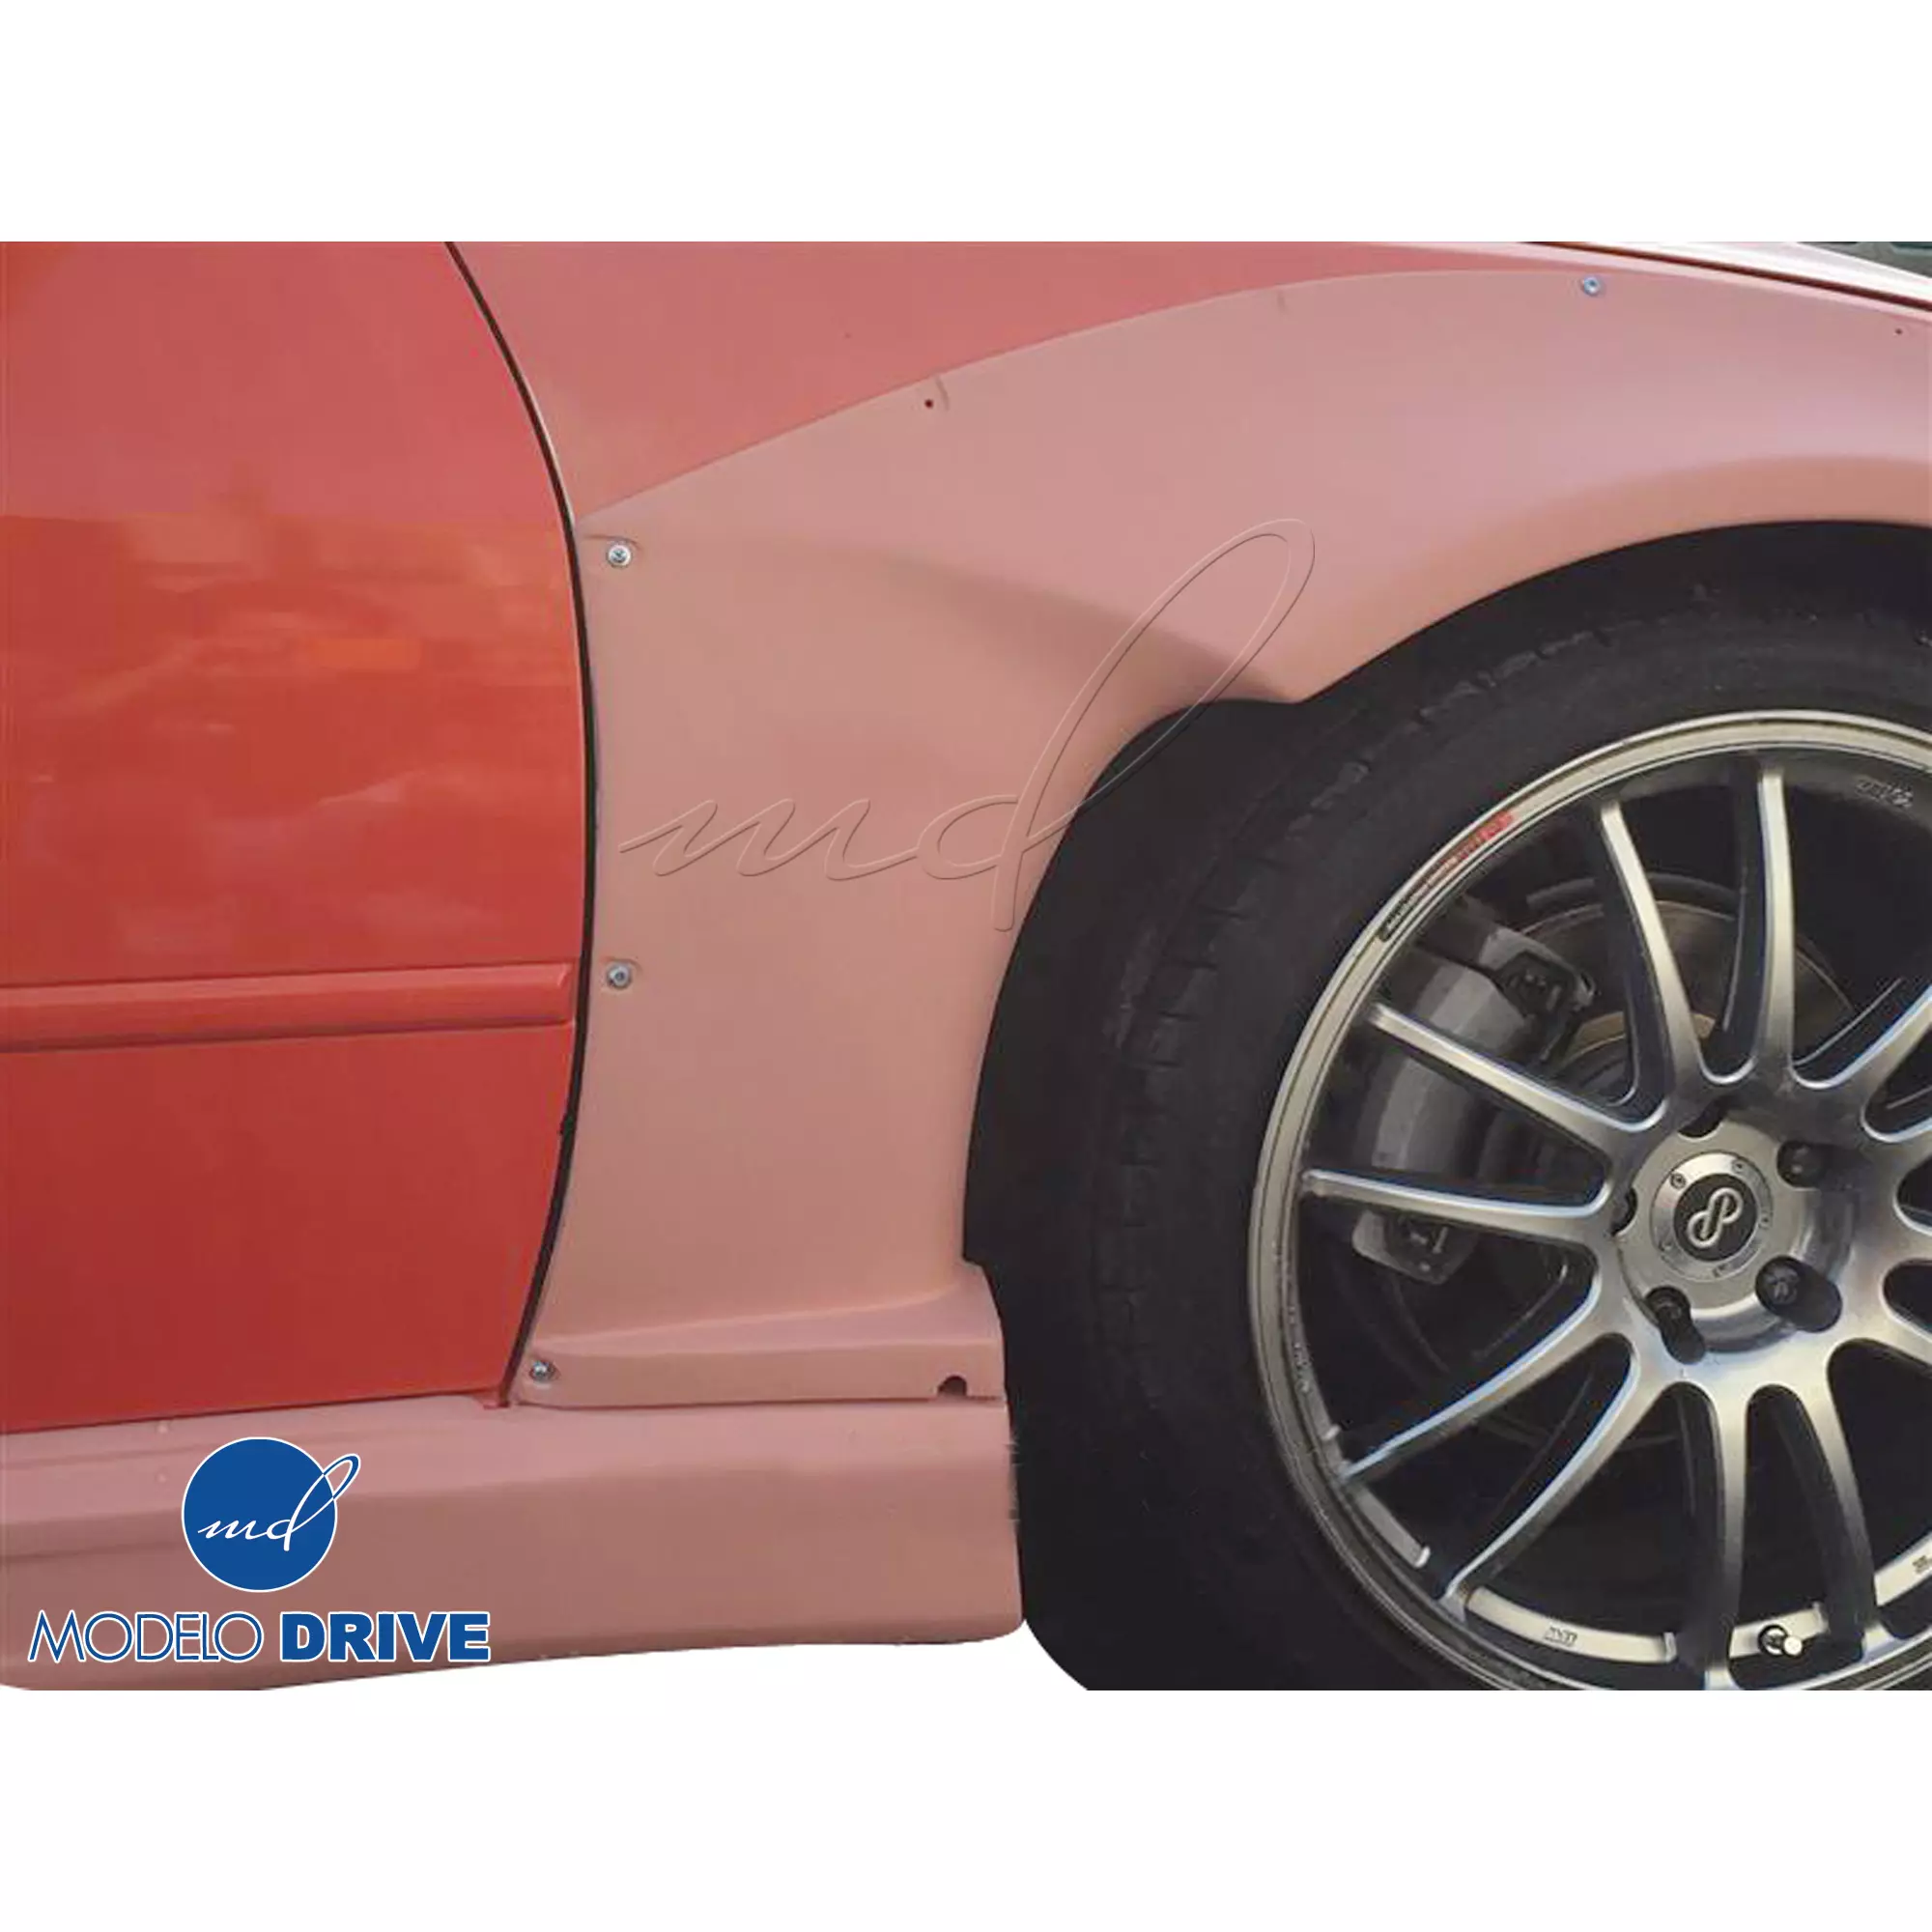 ModeloDrive FRP MSV Wide Body 40mm Fender Flares (front) 4pc > Lexus IS Series IS300 2000-2005> 4dr - Image 29